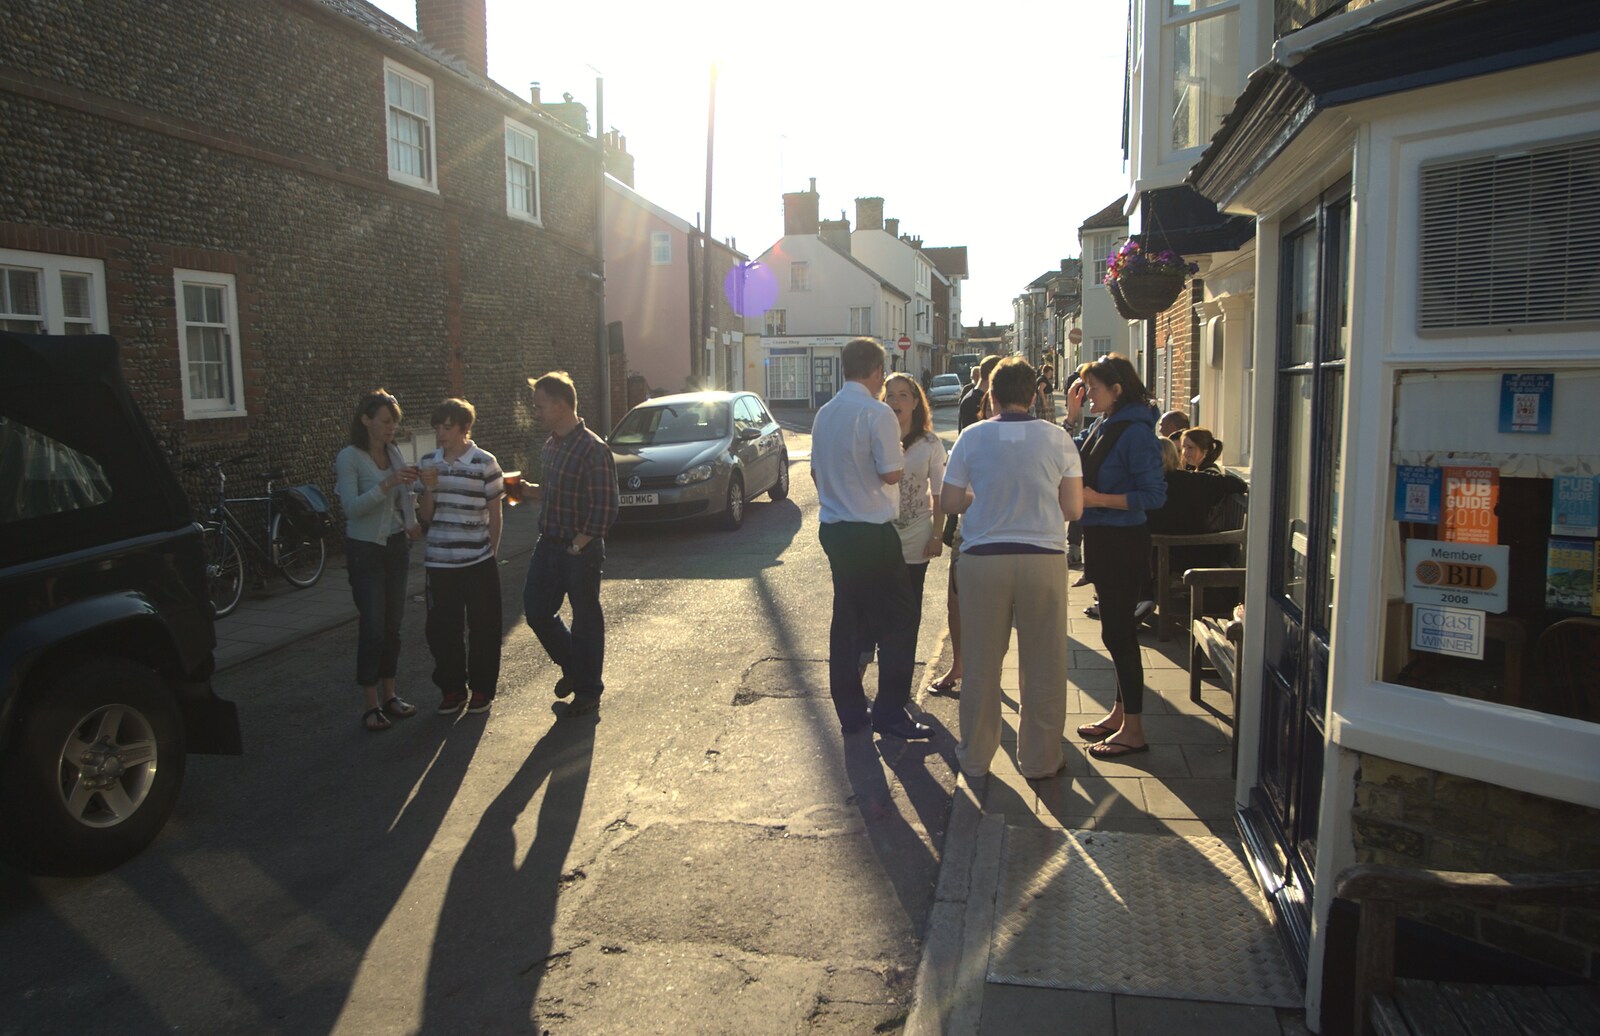 In the evening sun outside the Lord Nelson from The First Anniversary, Southwold, Suffolk - 3rd July 2011